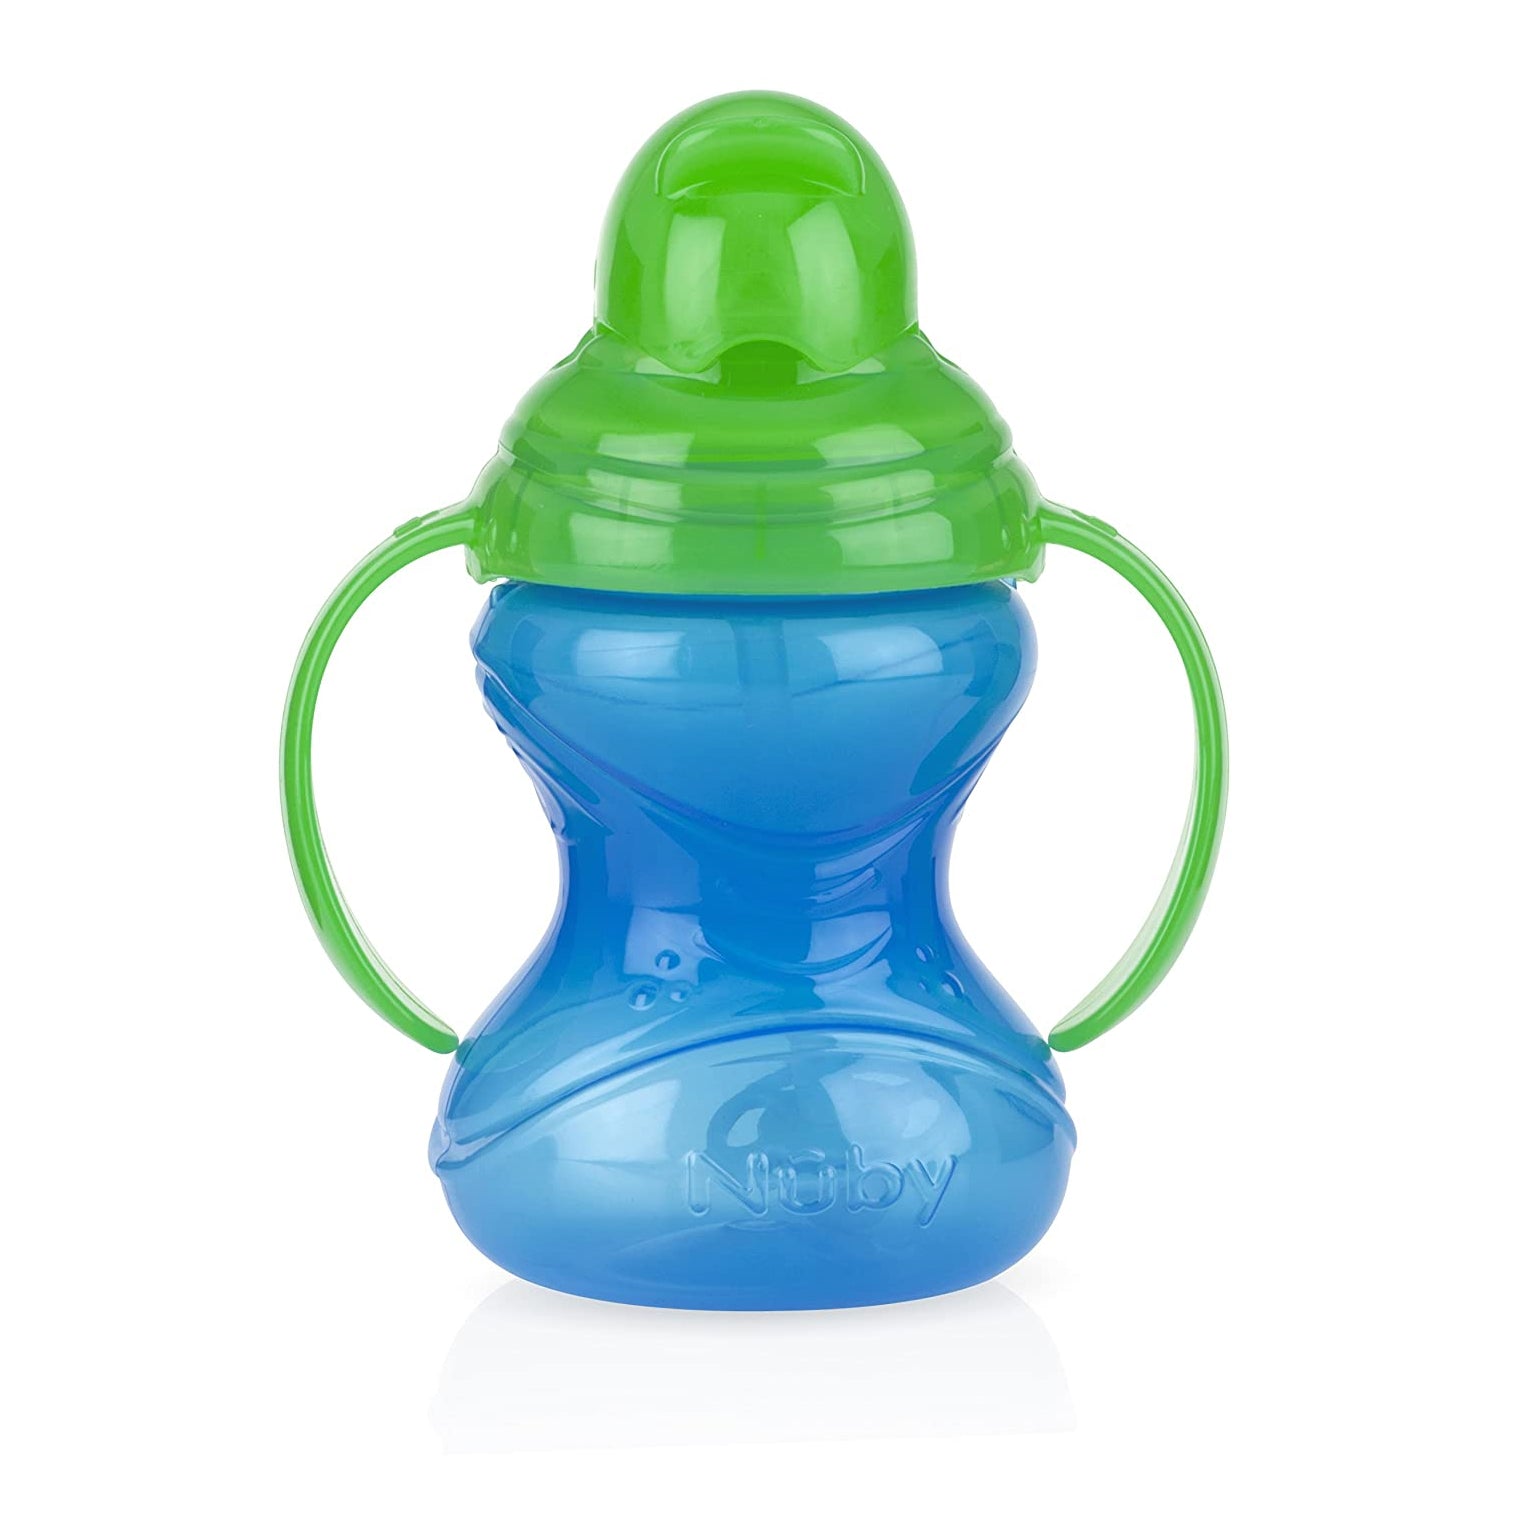 Nuby No-Spill? Cup with Flex Straw?